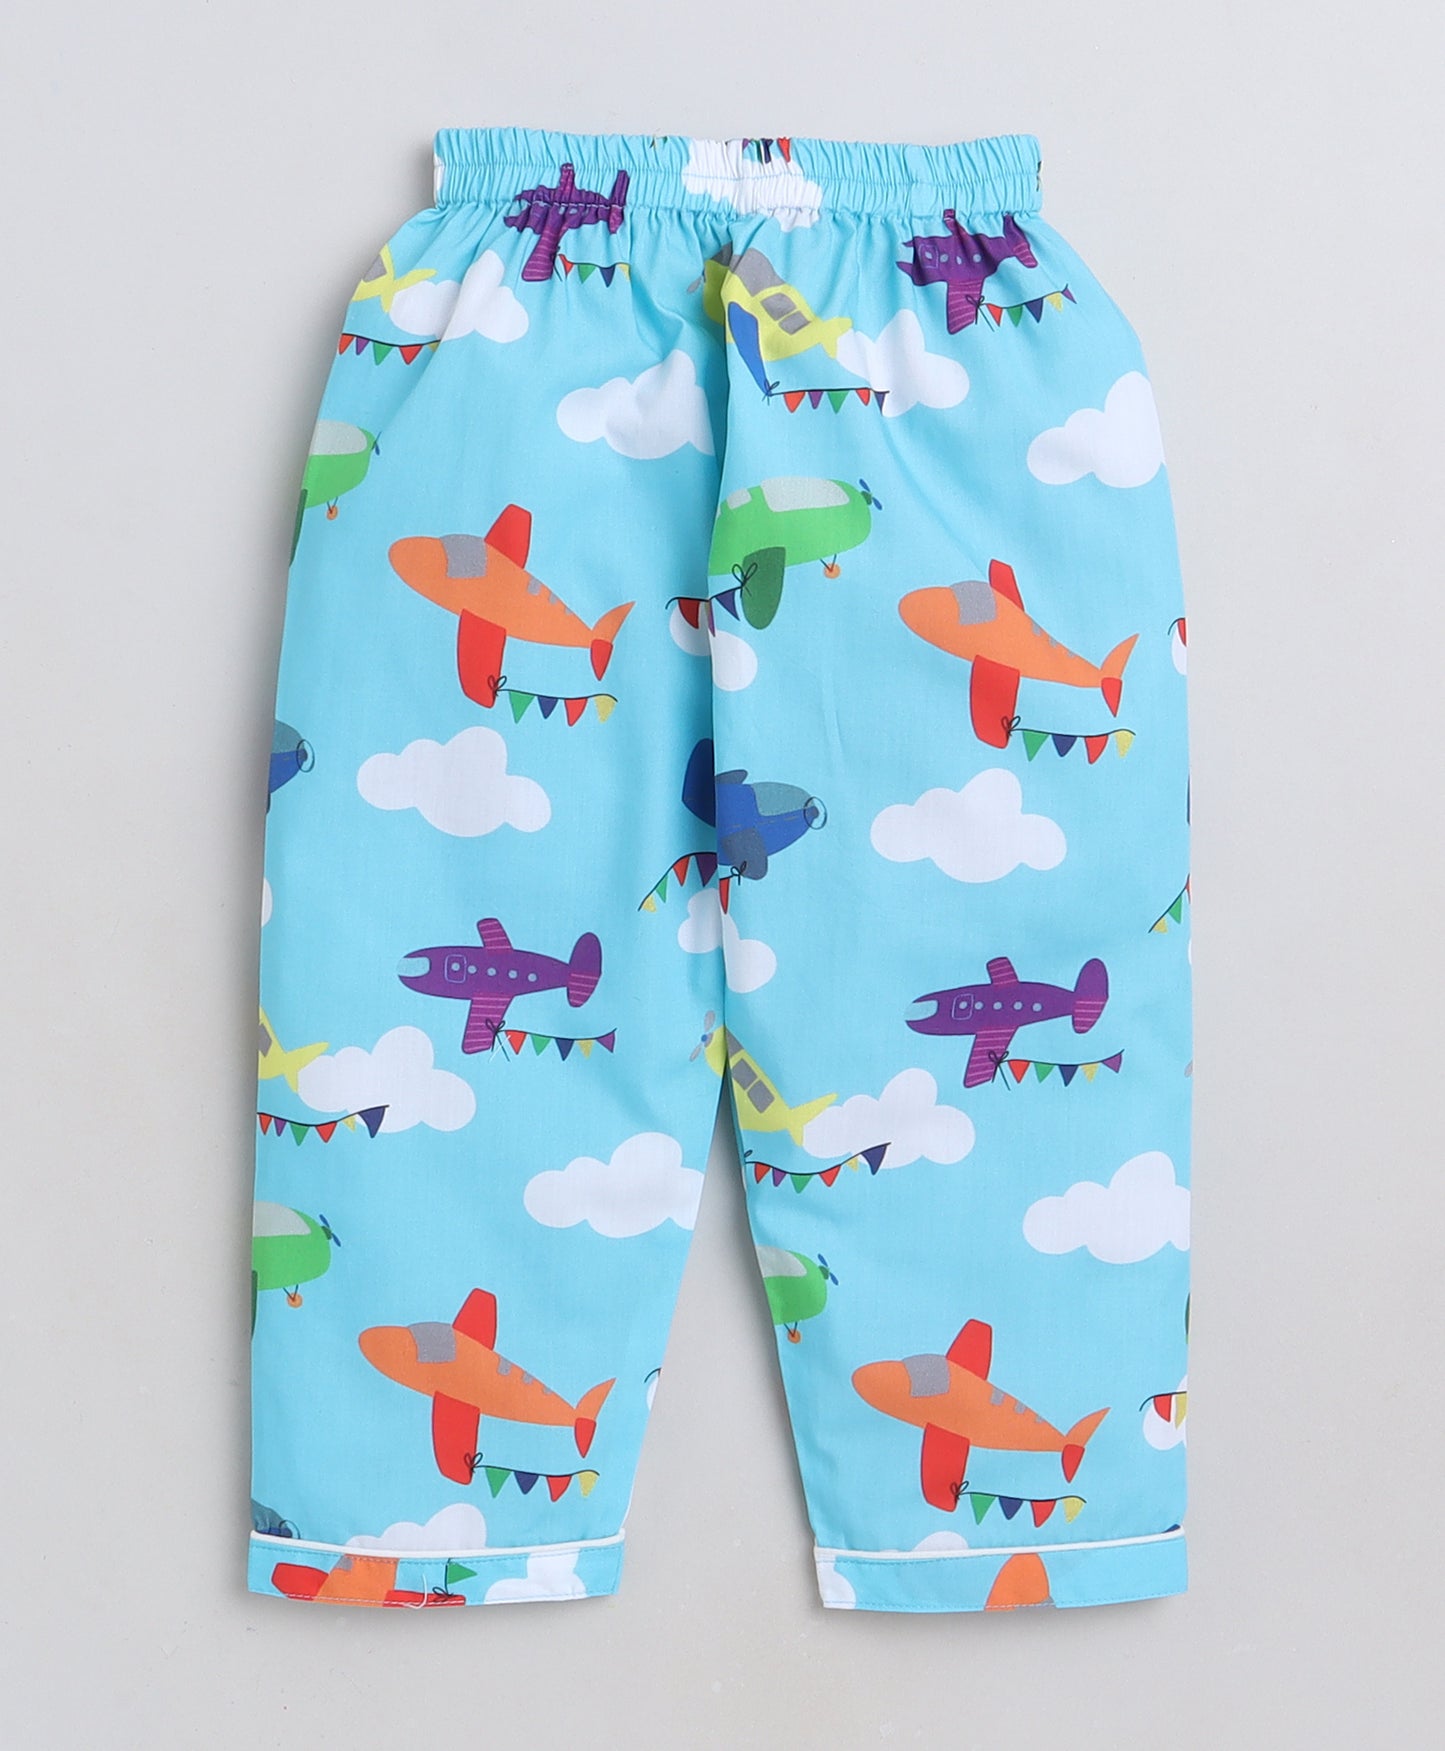 Knitting Doodles Premium cotton Kids' Notched Collar Night suit in cute Aeroplanes  Print- Blue